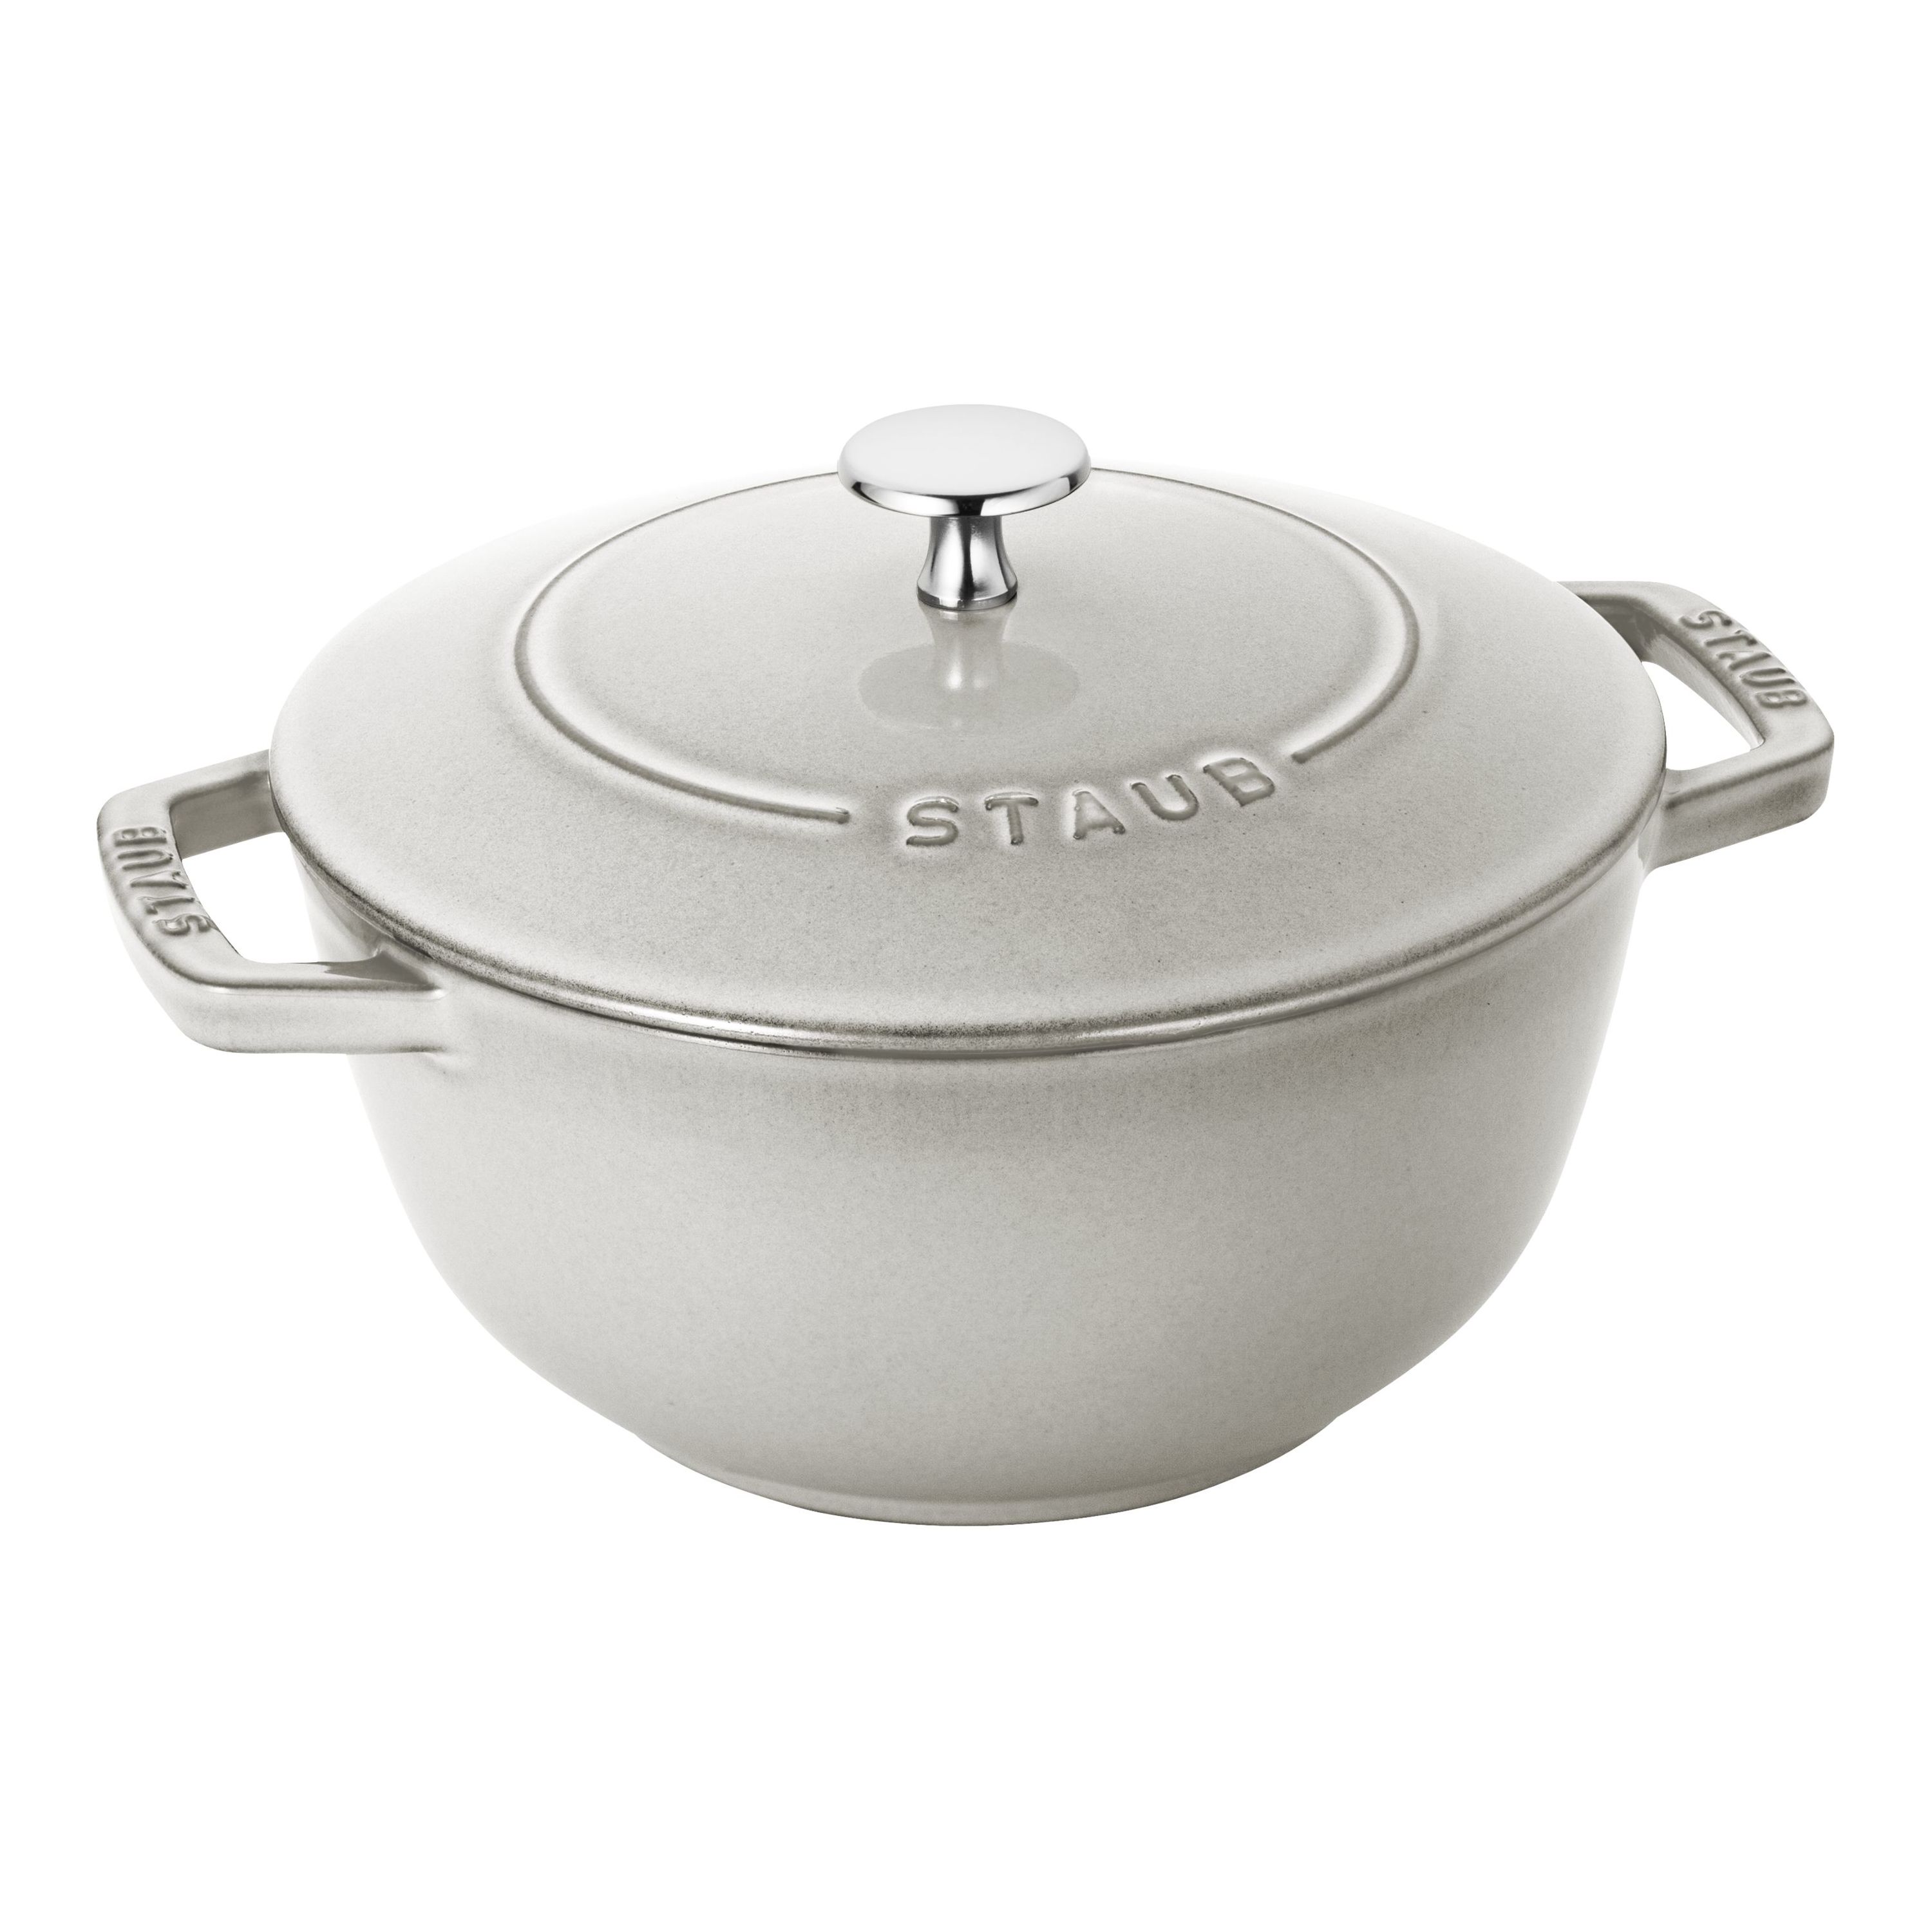 Staub Cast Iron 3.75-qt Essential French Oven - White Truffle, Made in  France